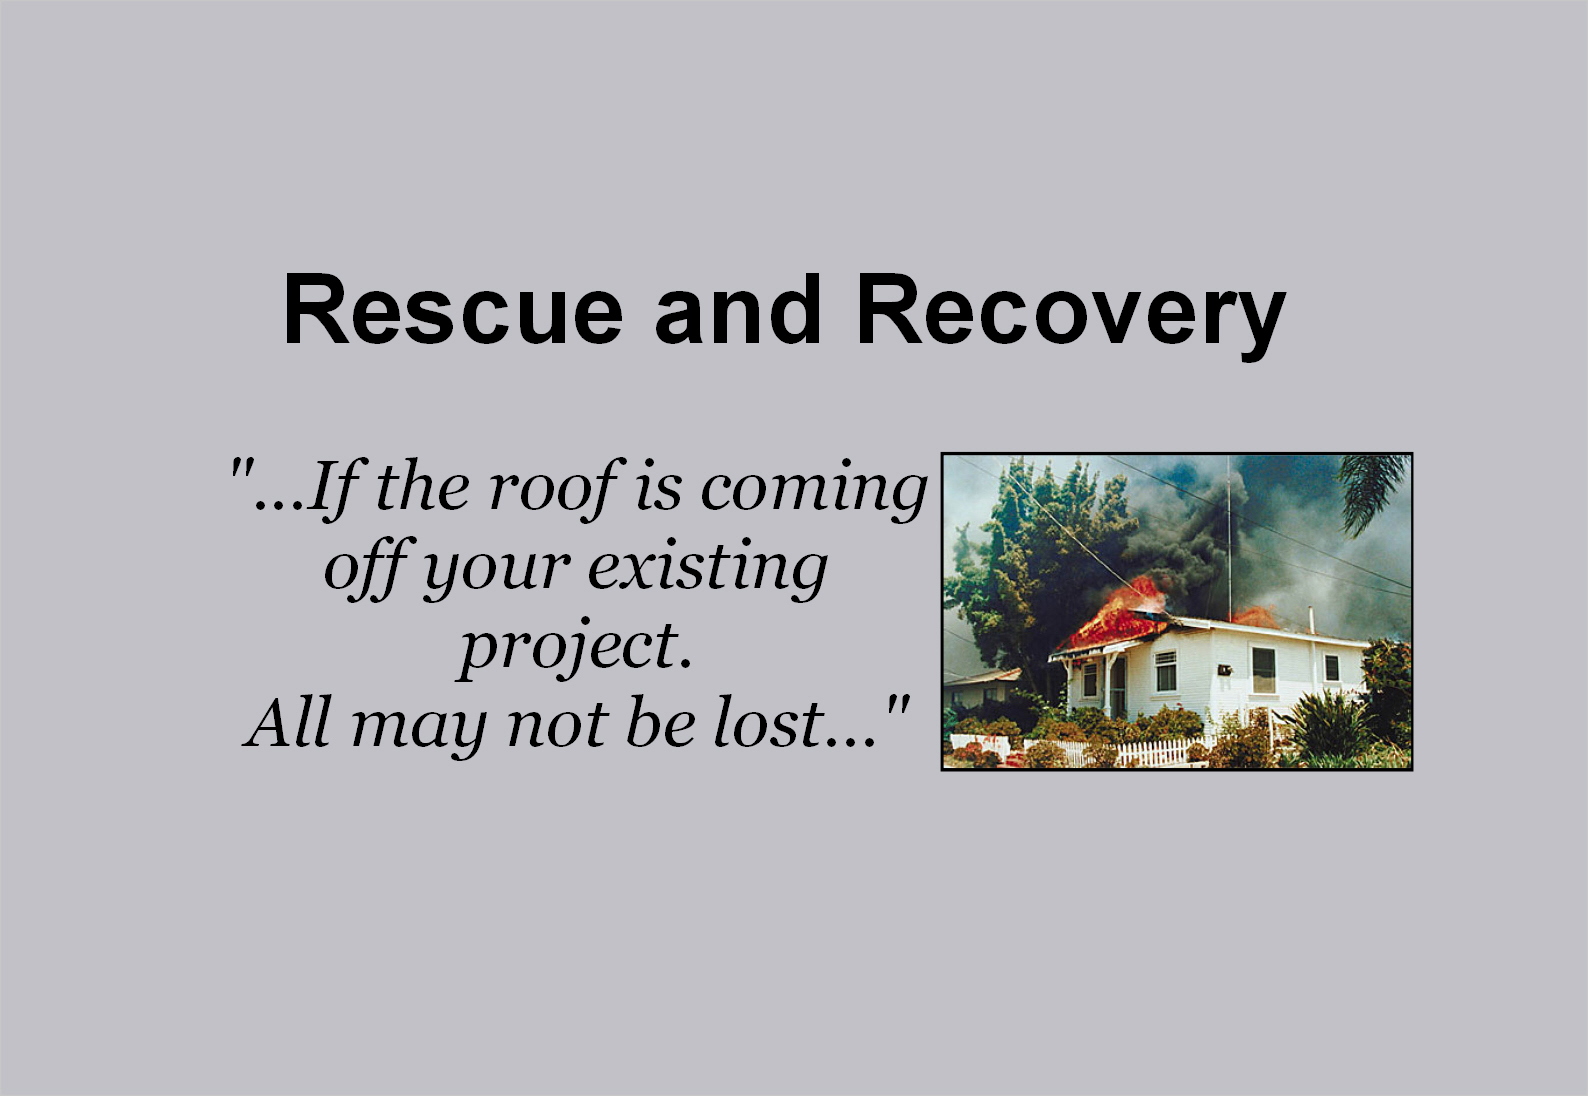 Rescue and Recovery 3